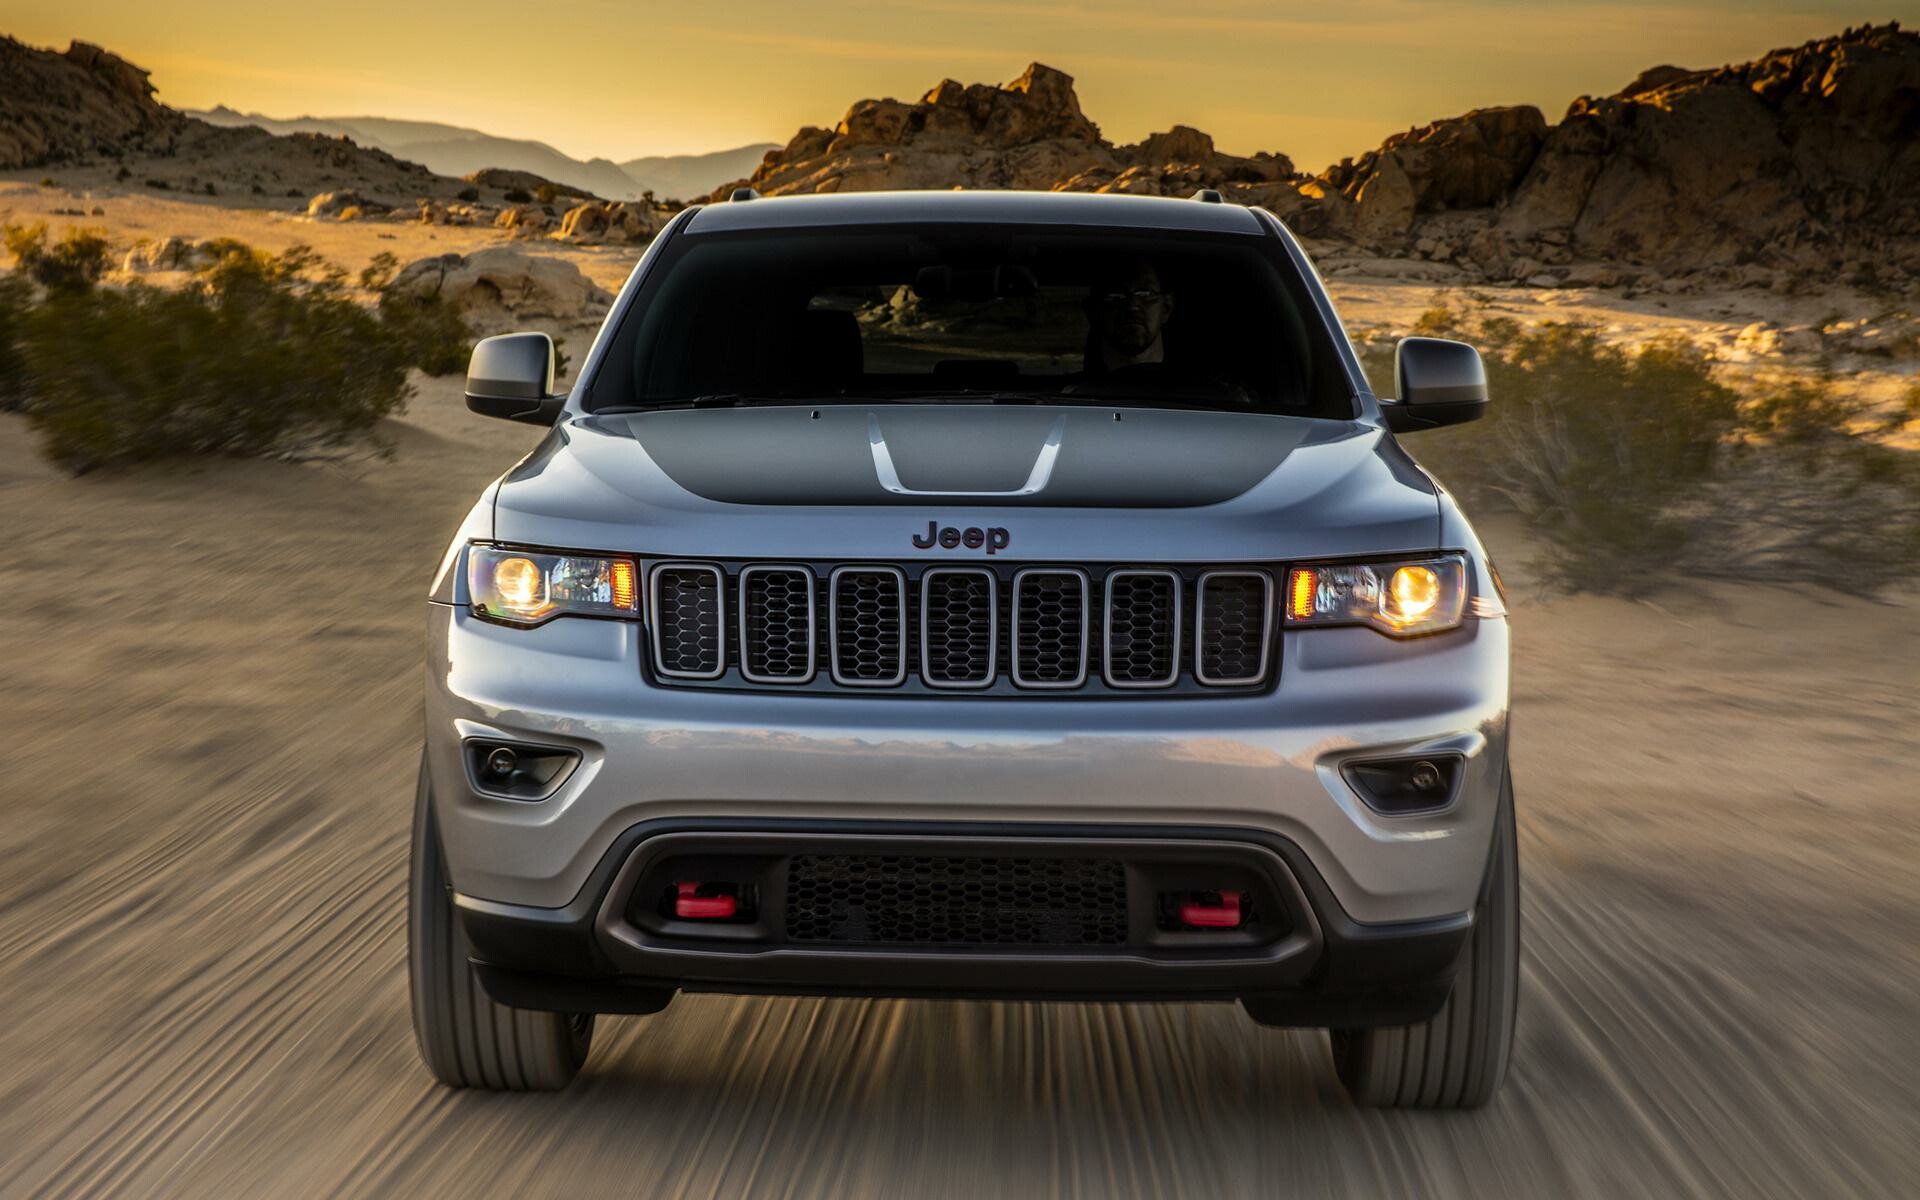 Jeep Grand Cherokee: The first unibody SUV, Pioneered a number of compact sport-utility features. 1920x1200 HD Background.